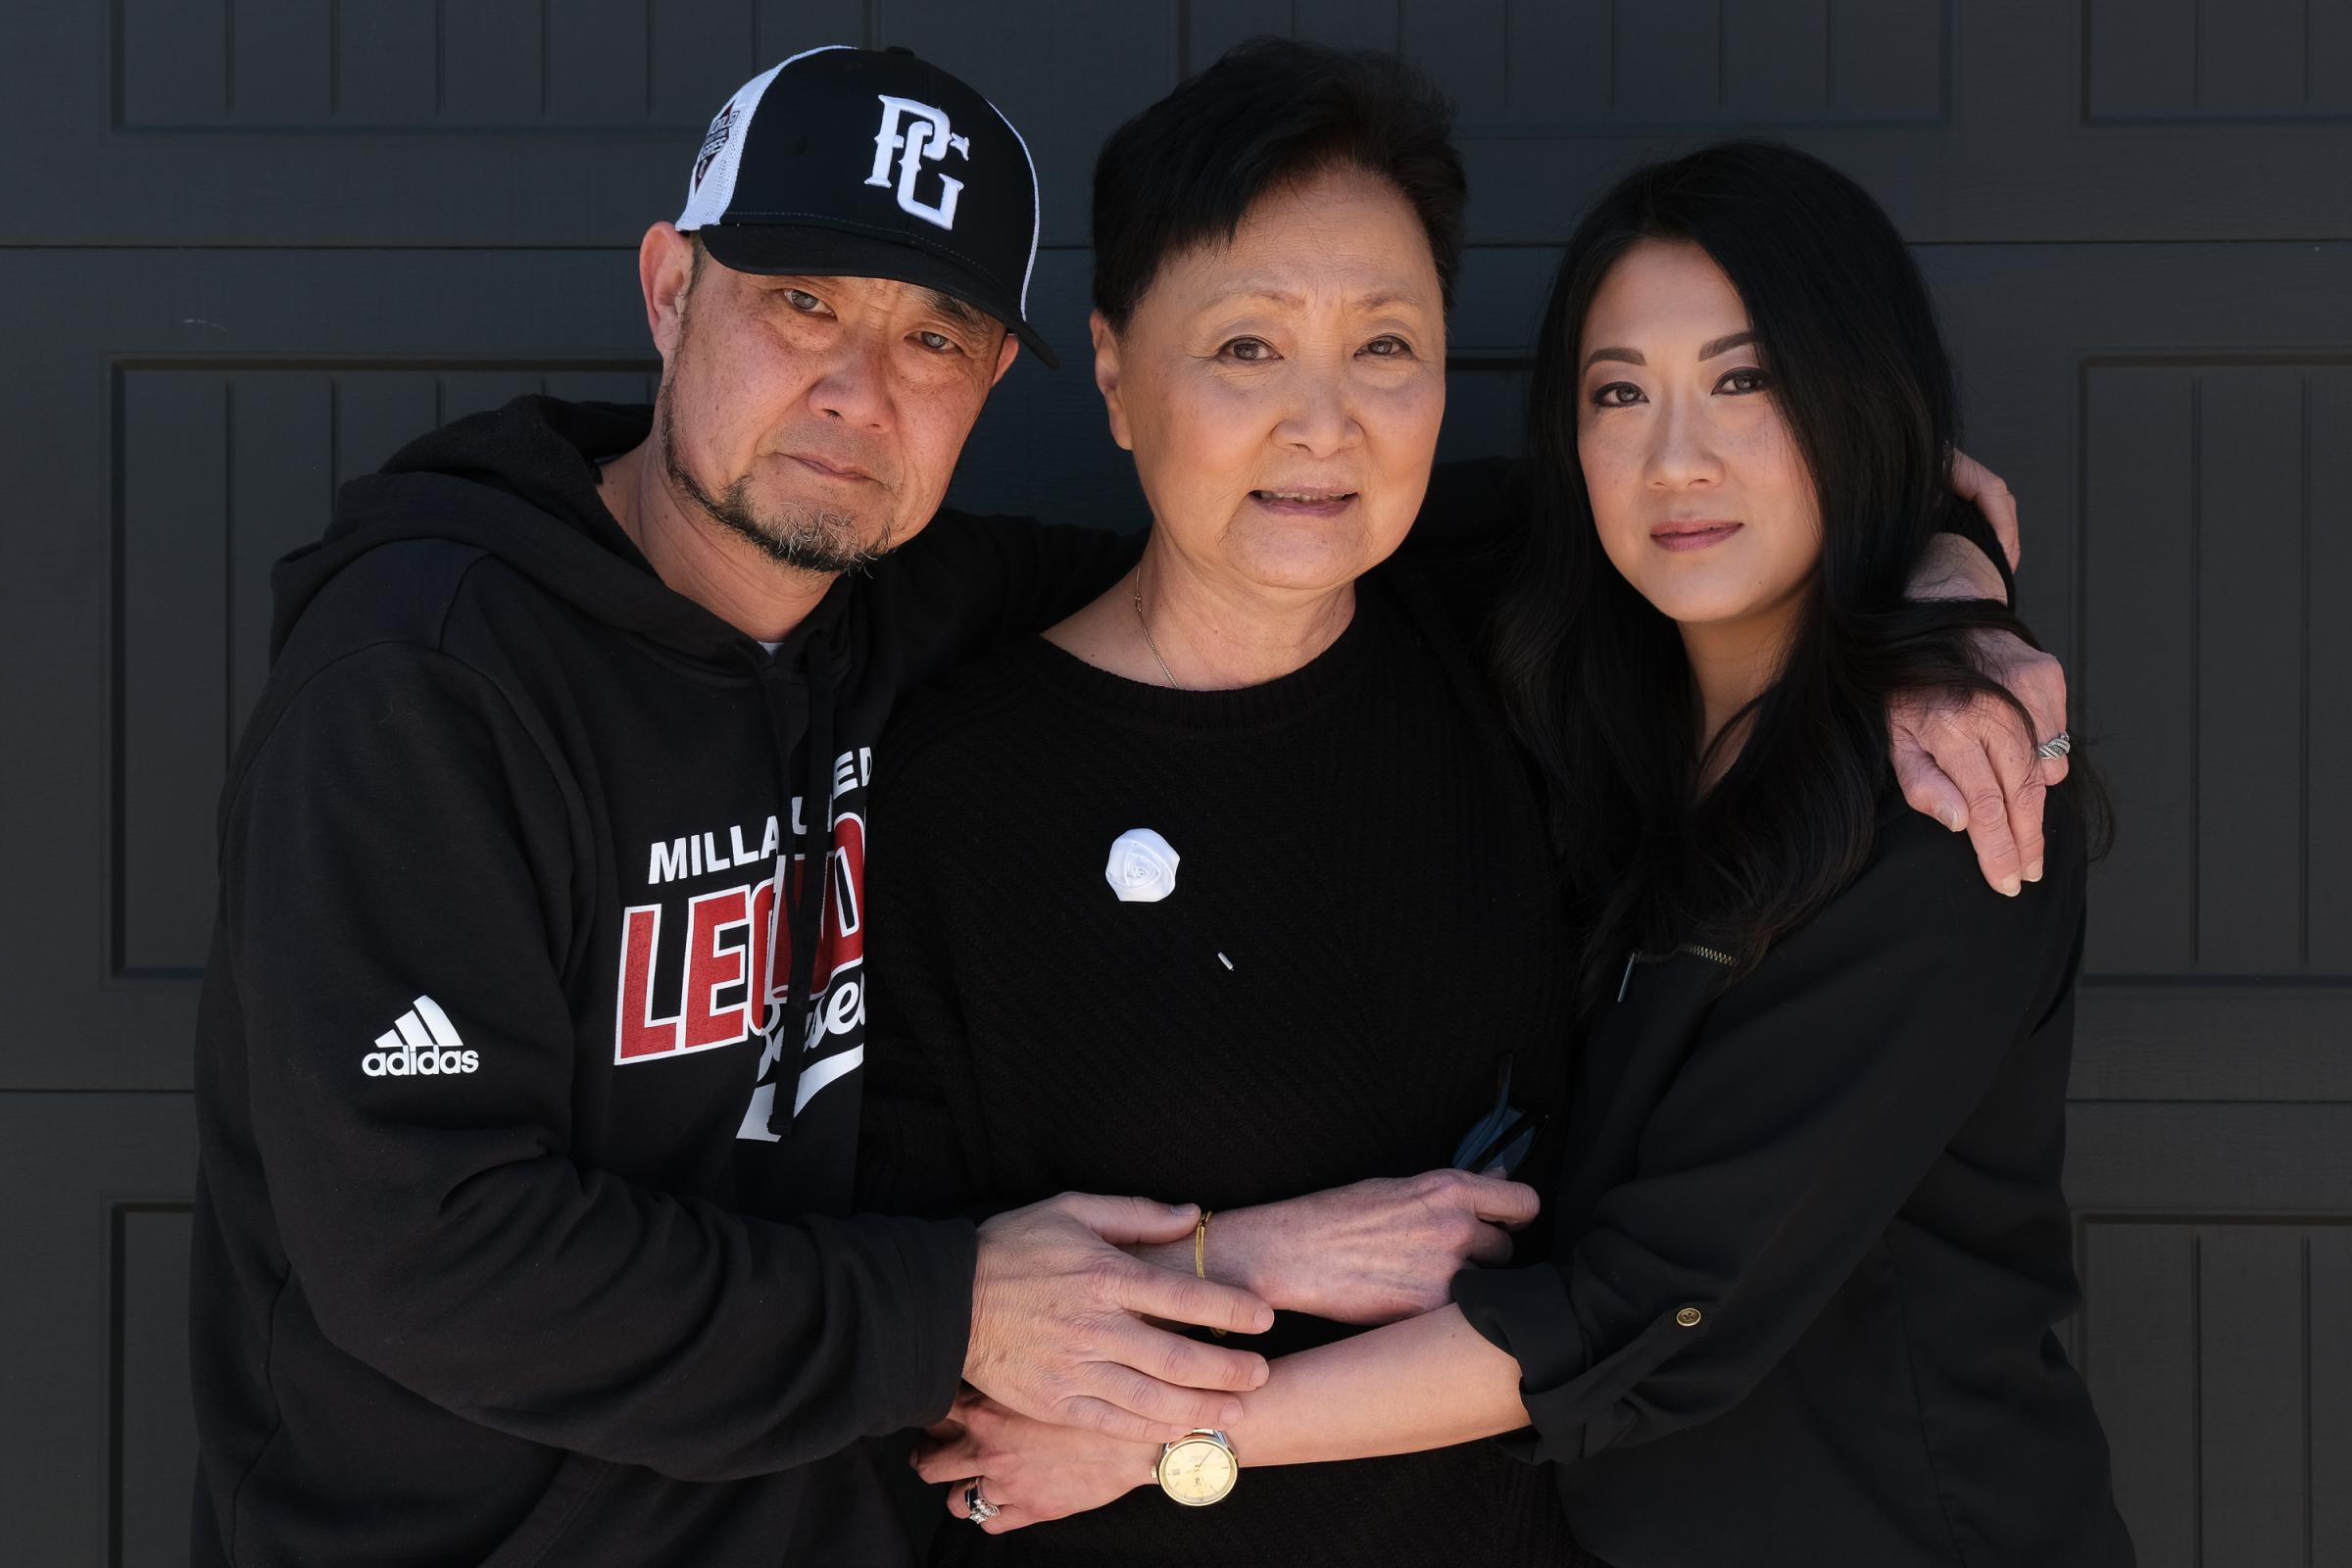 OMAHA, NE - MARCH 19, 2022: Ping Wang, Lu Wang, and Anne Peterson pose for a portrait in Omaha, Nebraska on March 19, 2022. (Photo by Arin Yoon for The Washington Post) Papillion United States